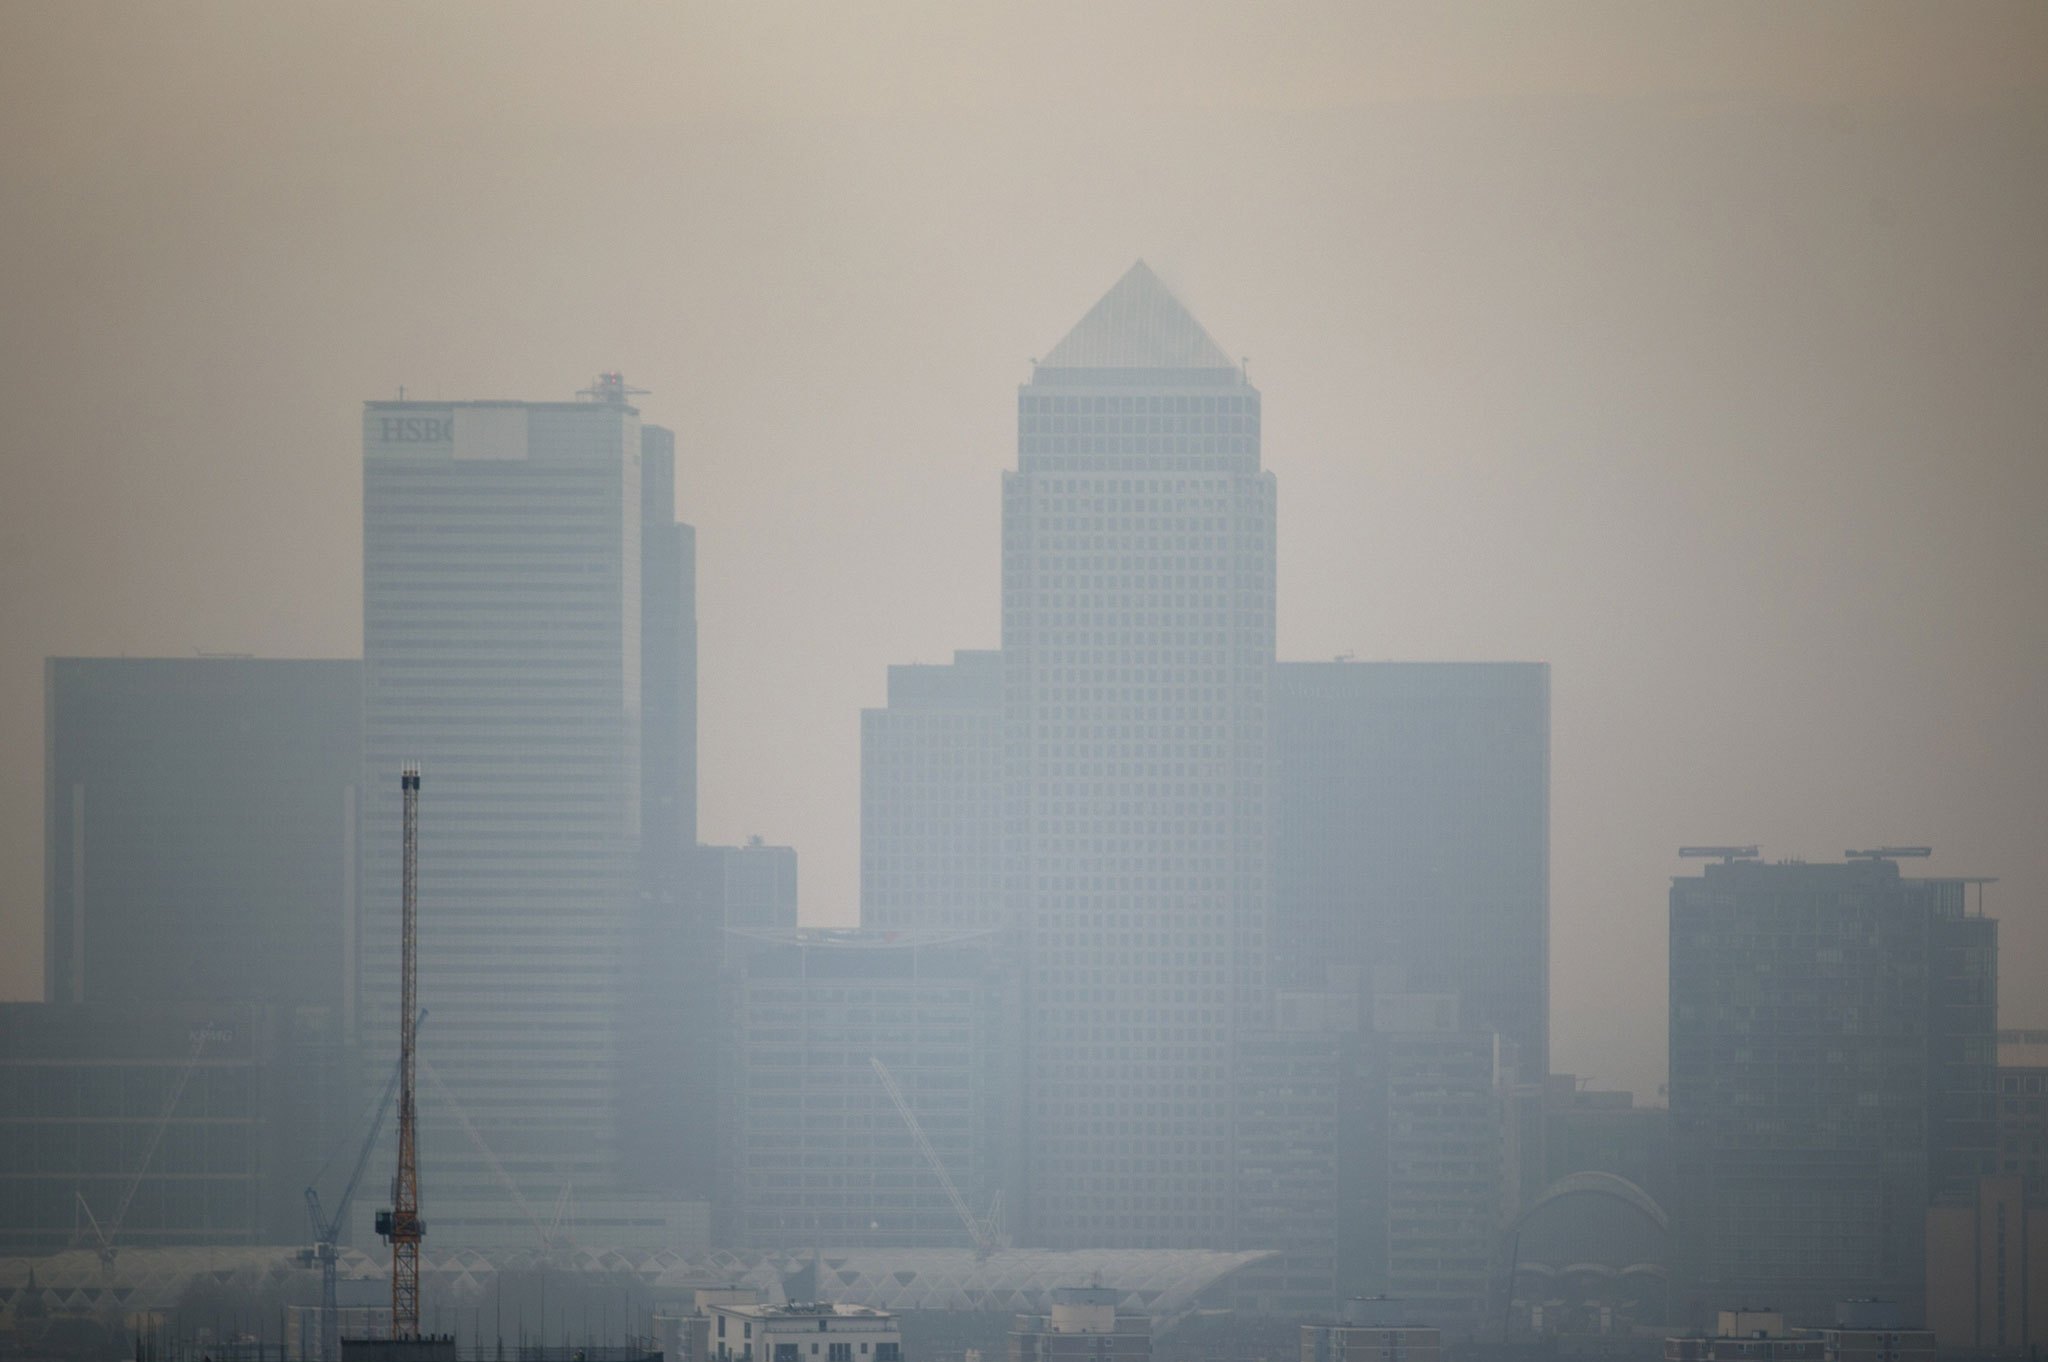 The skyscrapers of the Canary Wharf business district in London are shrouded in smog, as seen from a viewing gallery on the Orbit sculpture in the Queen Elizabeth Olympic Park during an tour of the park organized for the media